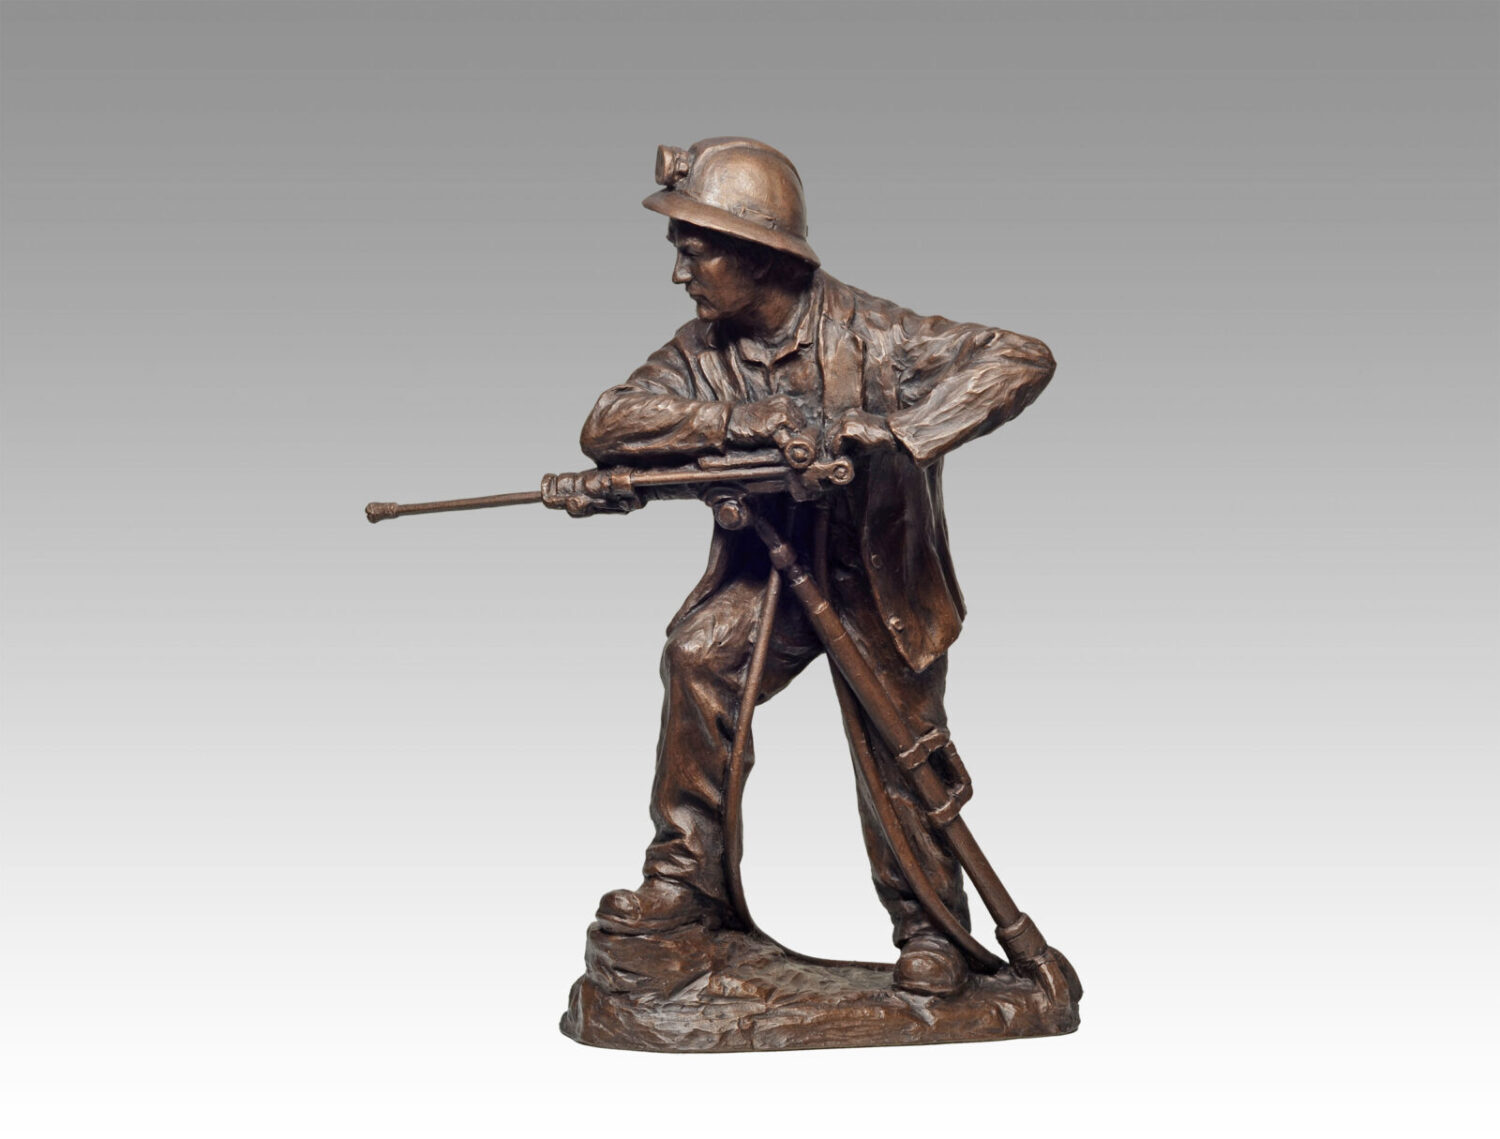 Gallery, Rockin the Drill (Jackleg Driller), $350 CAD, Metal Infused, 17” H x 13 ½” L, Edition 80, Mining Sculpture of a Jackleg Driller , Sculptor Tyler Fauvelle